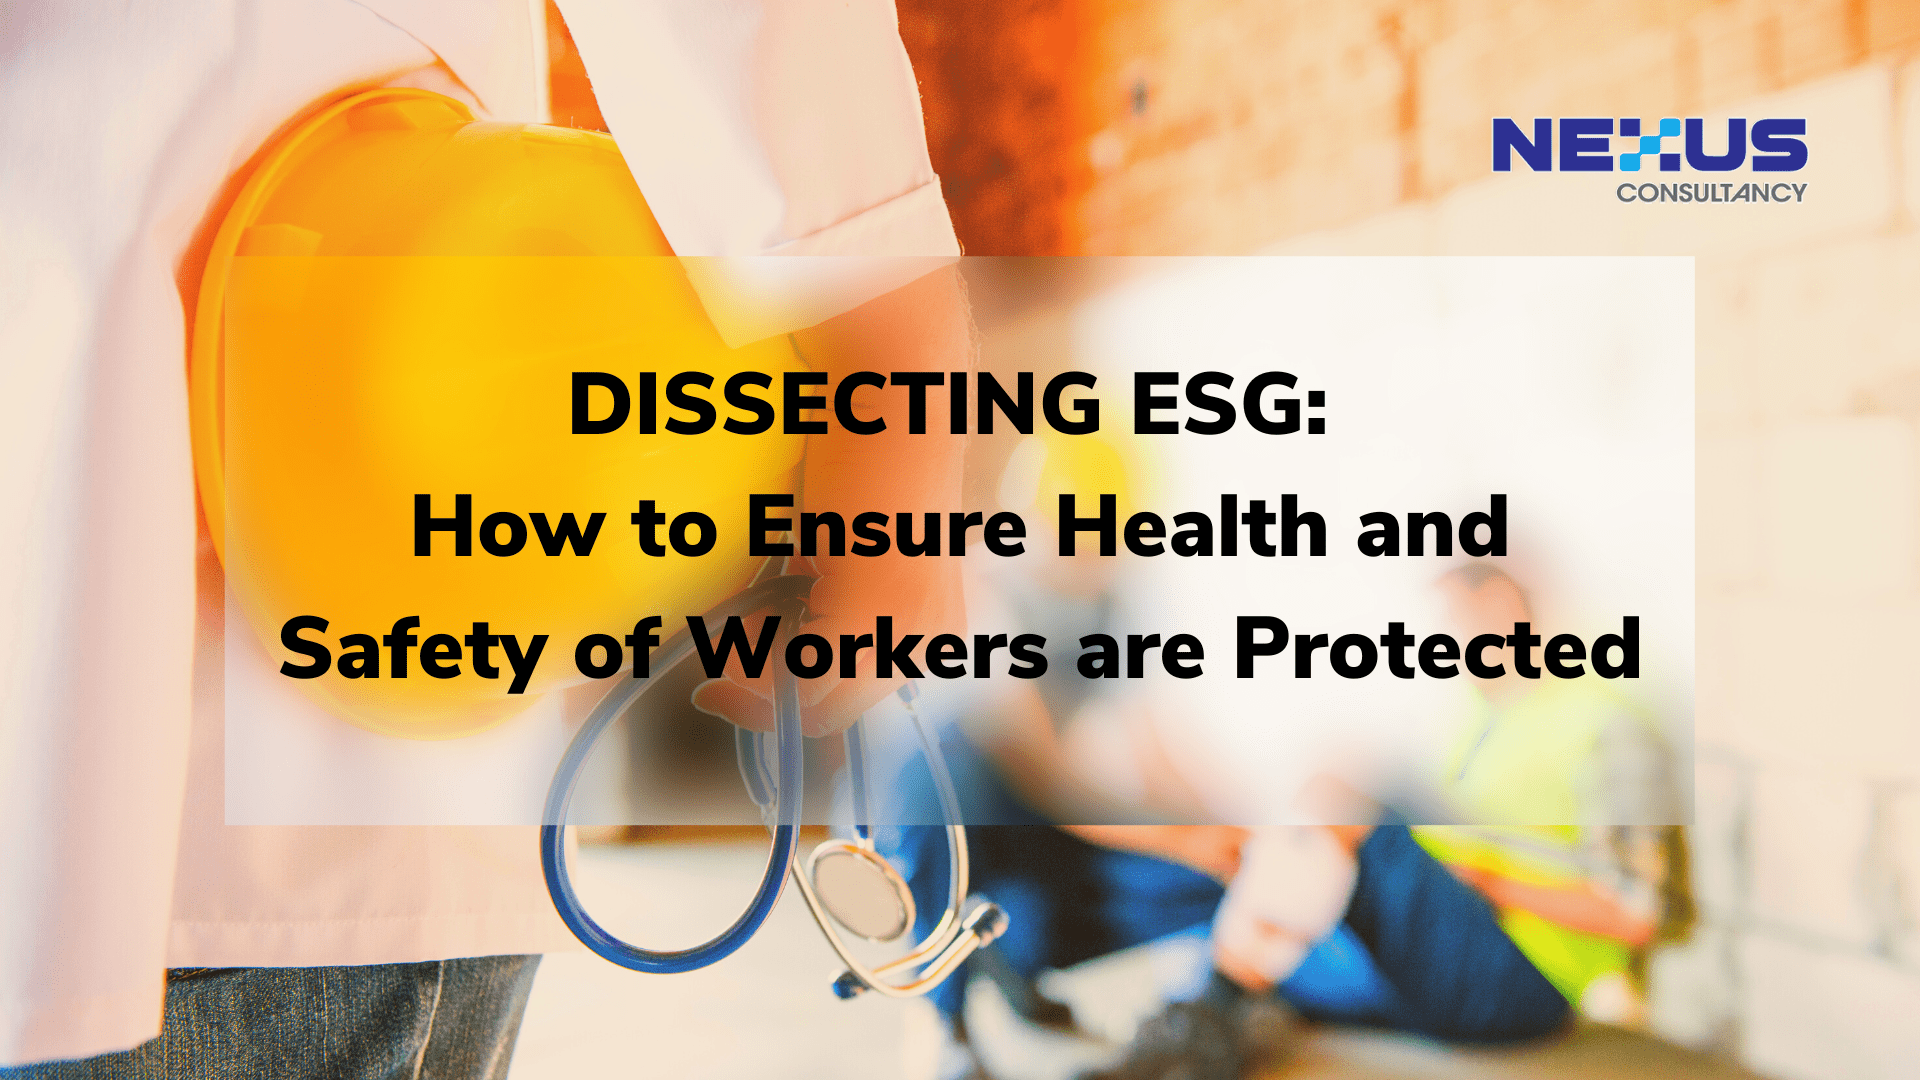 Dissecting ESG: How to Ensure Health and Safety of Workers are Protected